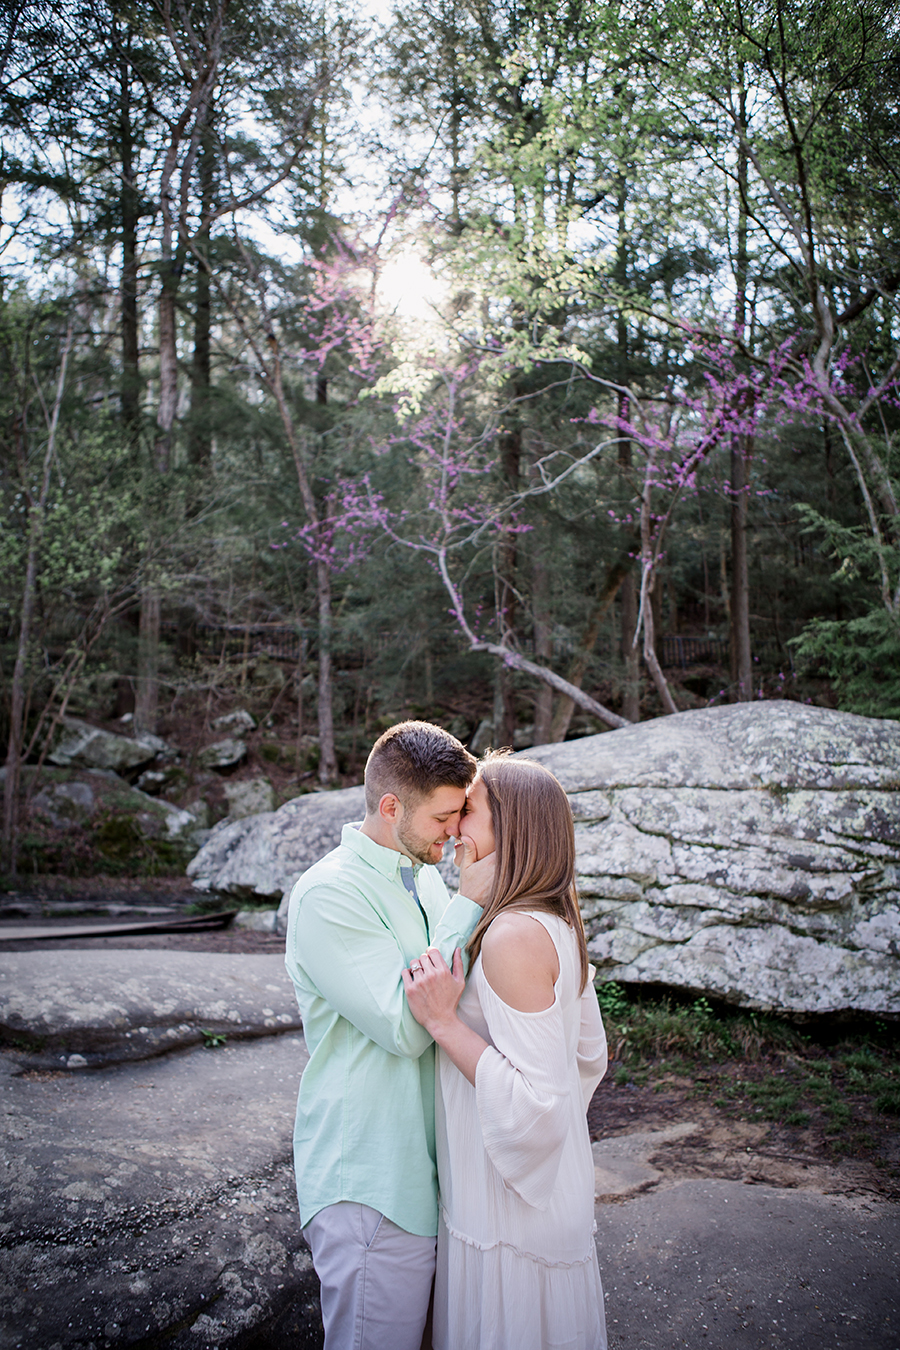 Her arms on his forearms engagement photo by Knoxville Wedding Photographer, Amanda May Photos.